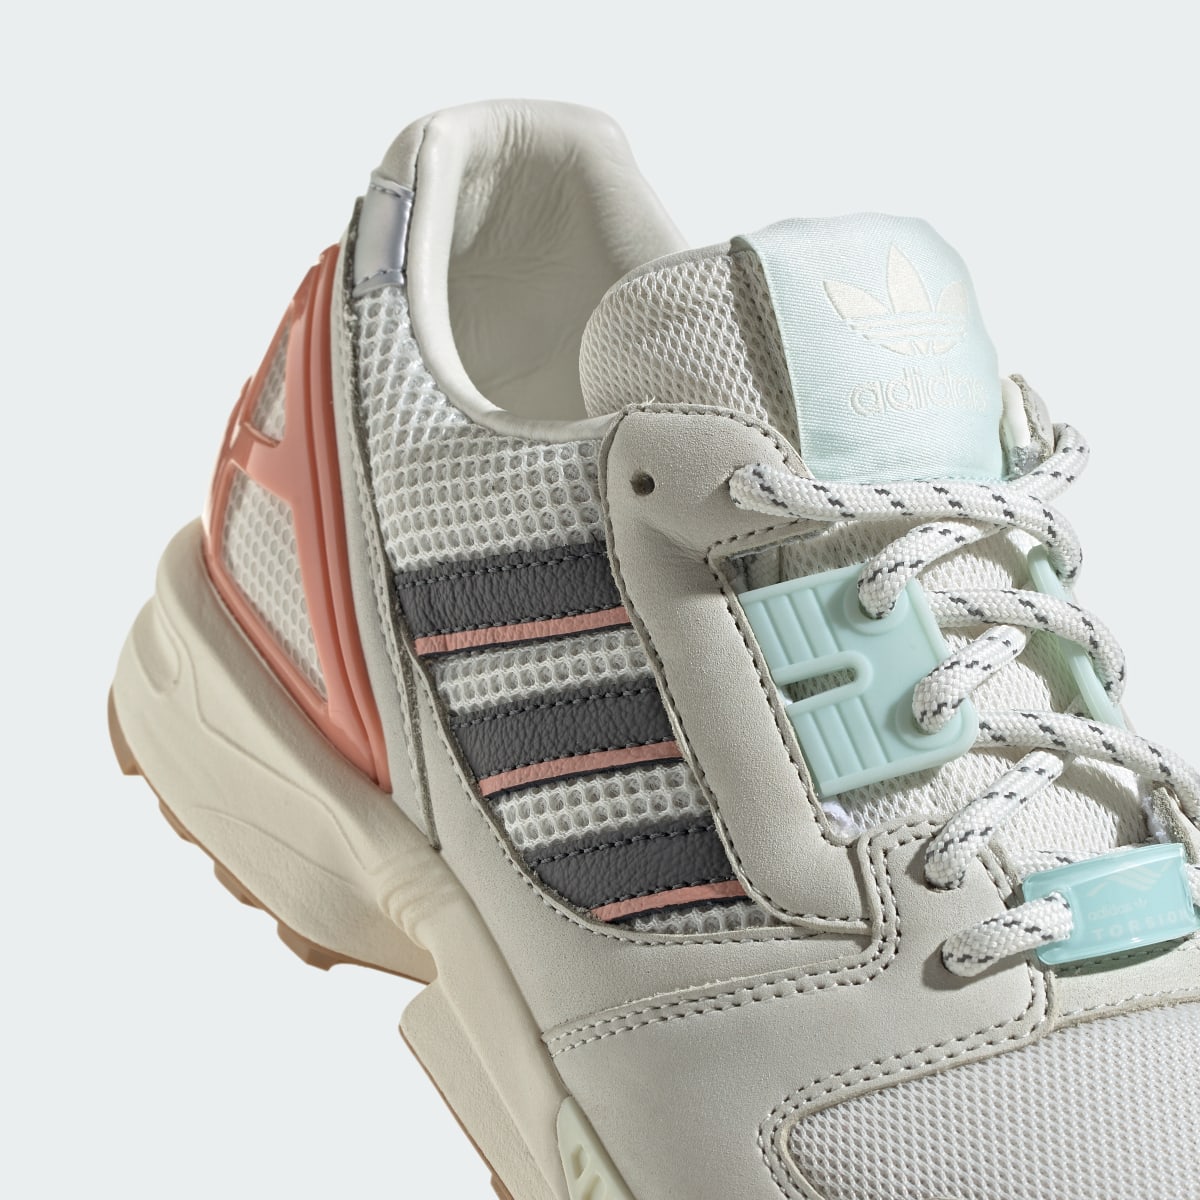 Adidas ZX 8000 Shoes. 10